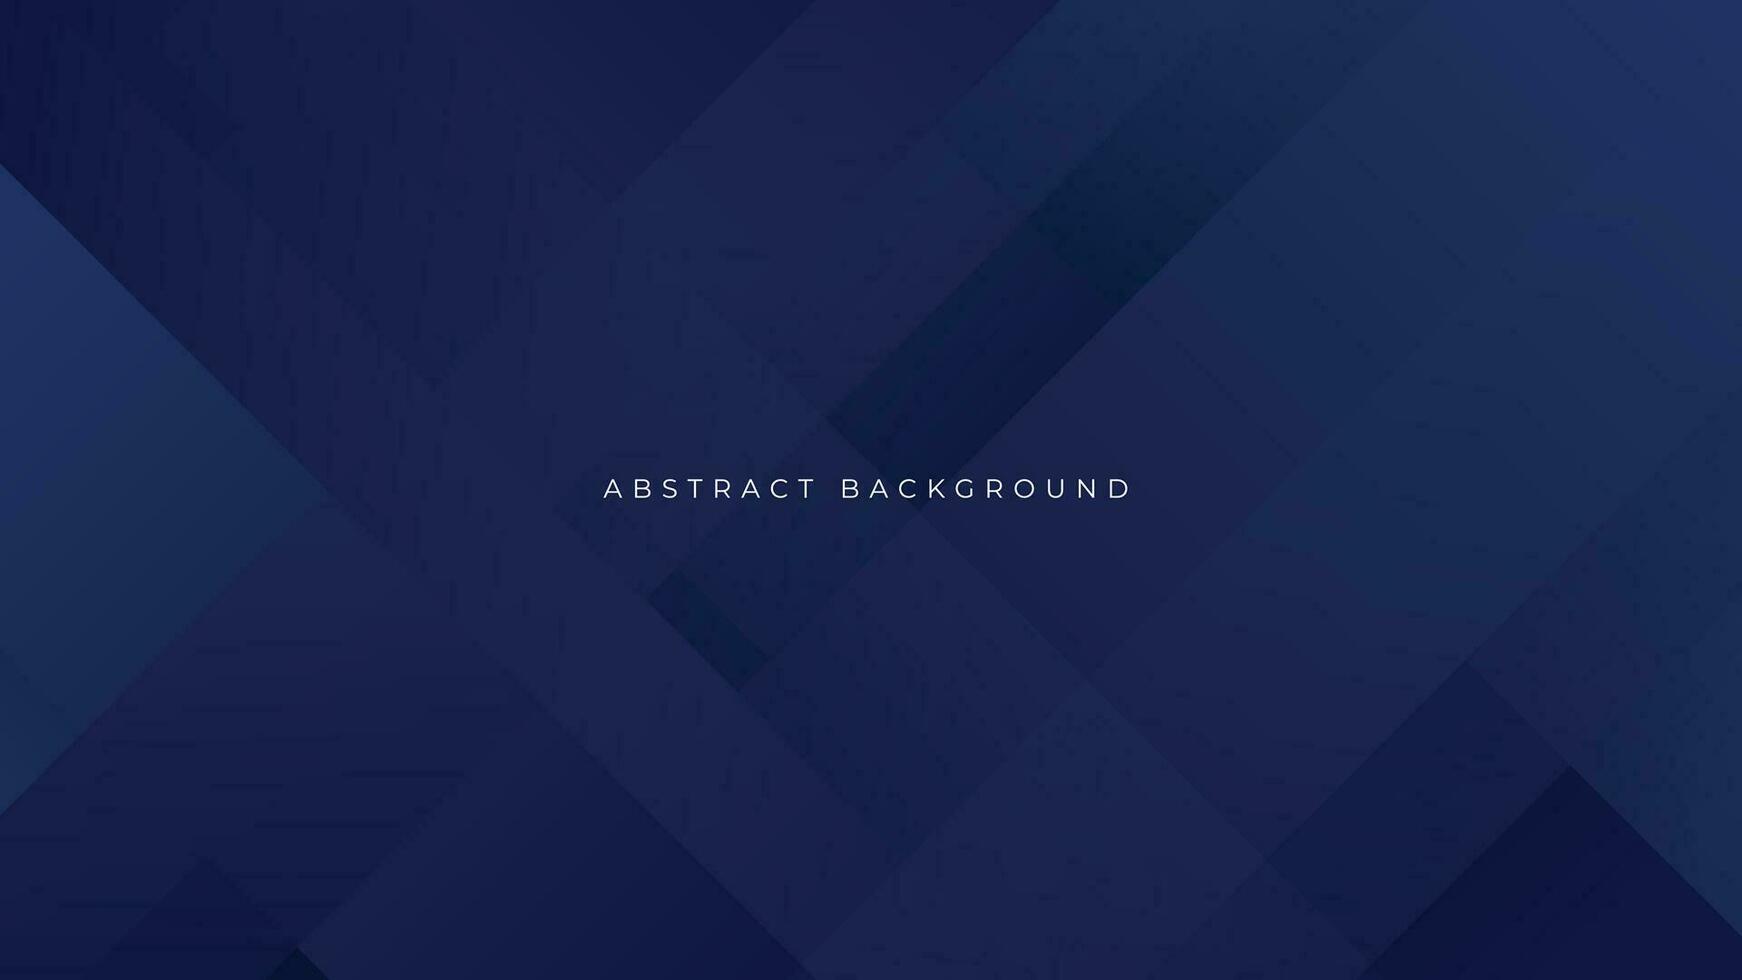 Modern abstract geometric blue background with shadow suit for business corporate banner backdrop presentation and much more Premium Vector